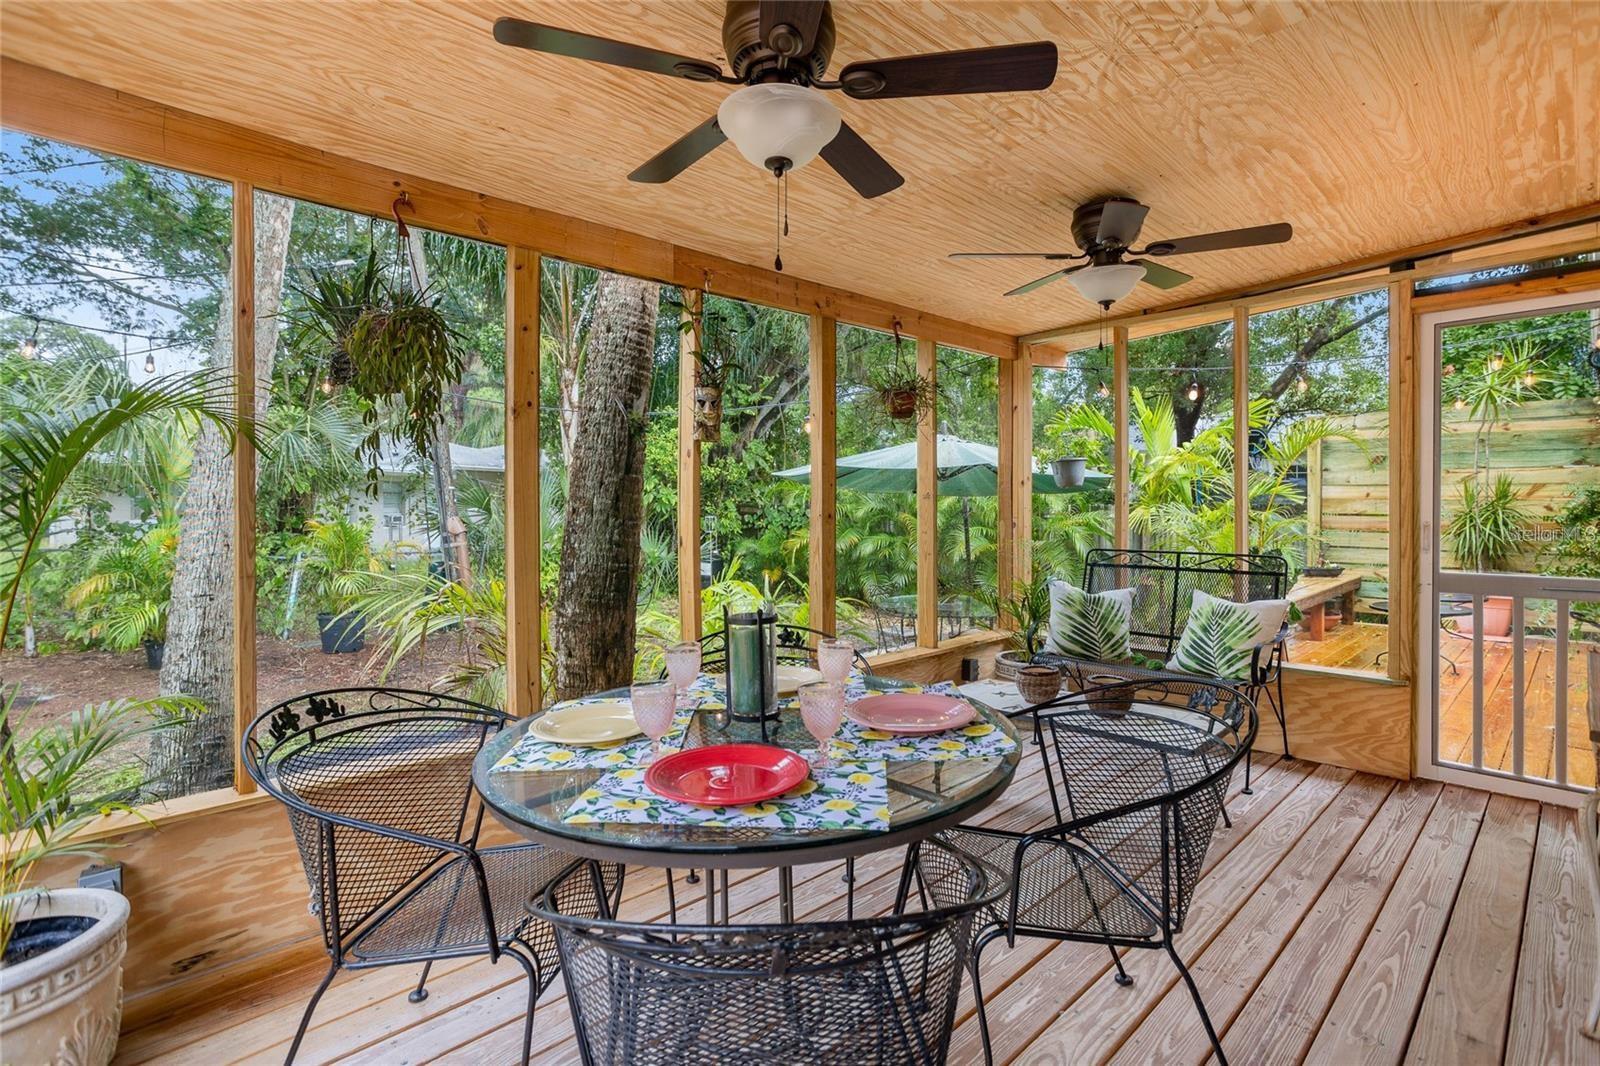 Covered, screened patio